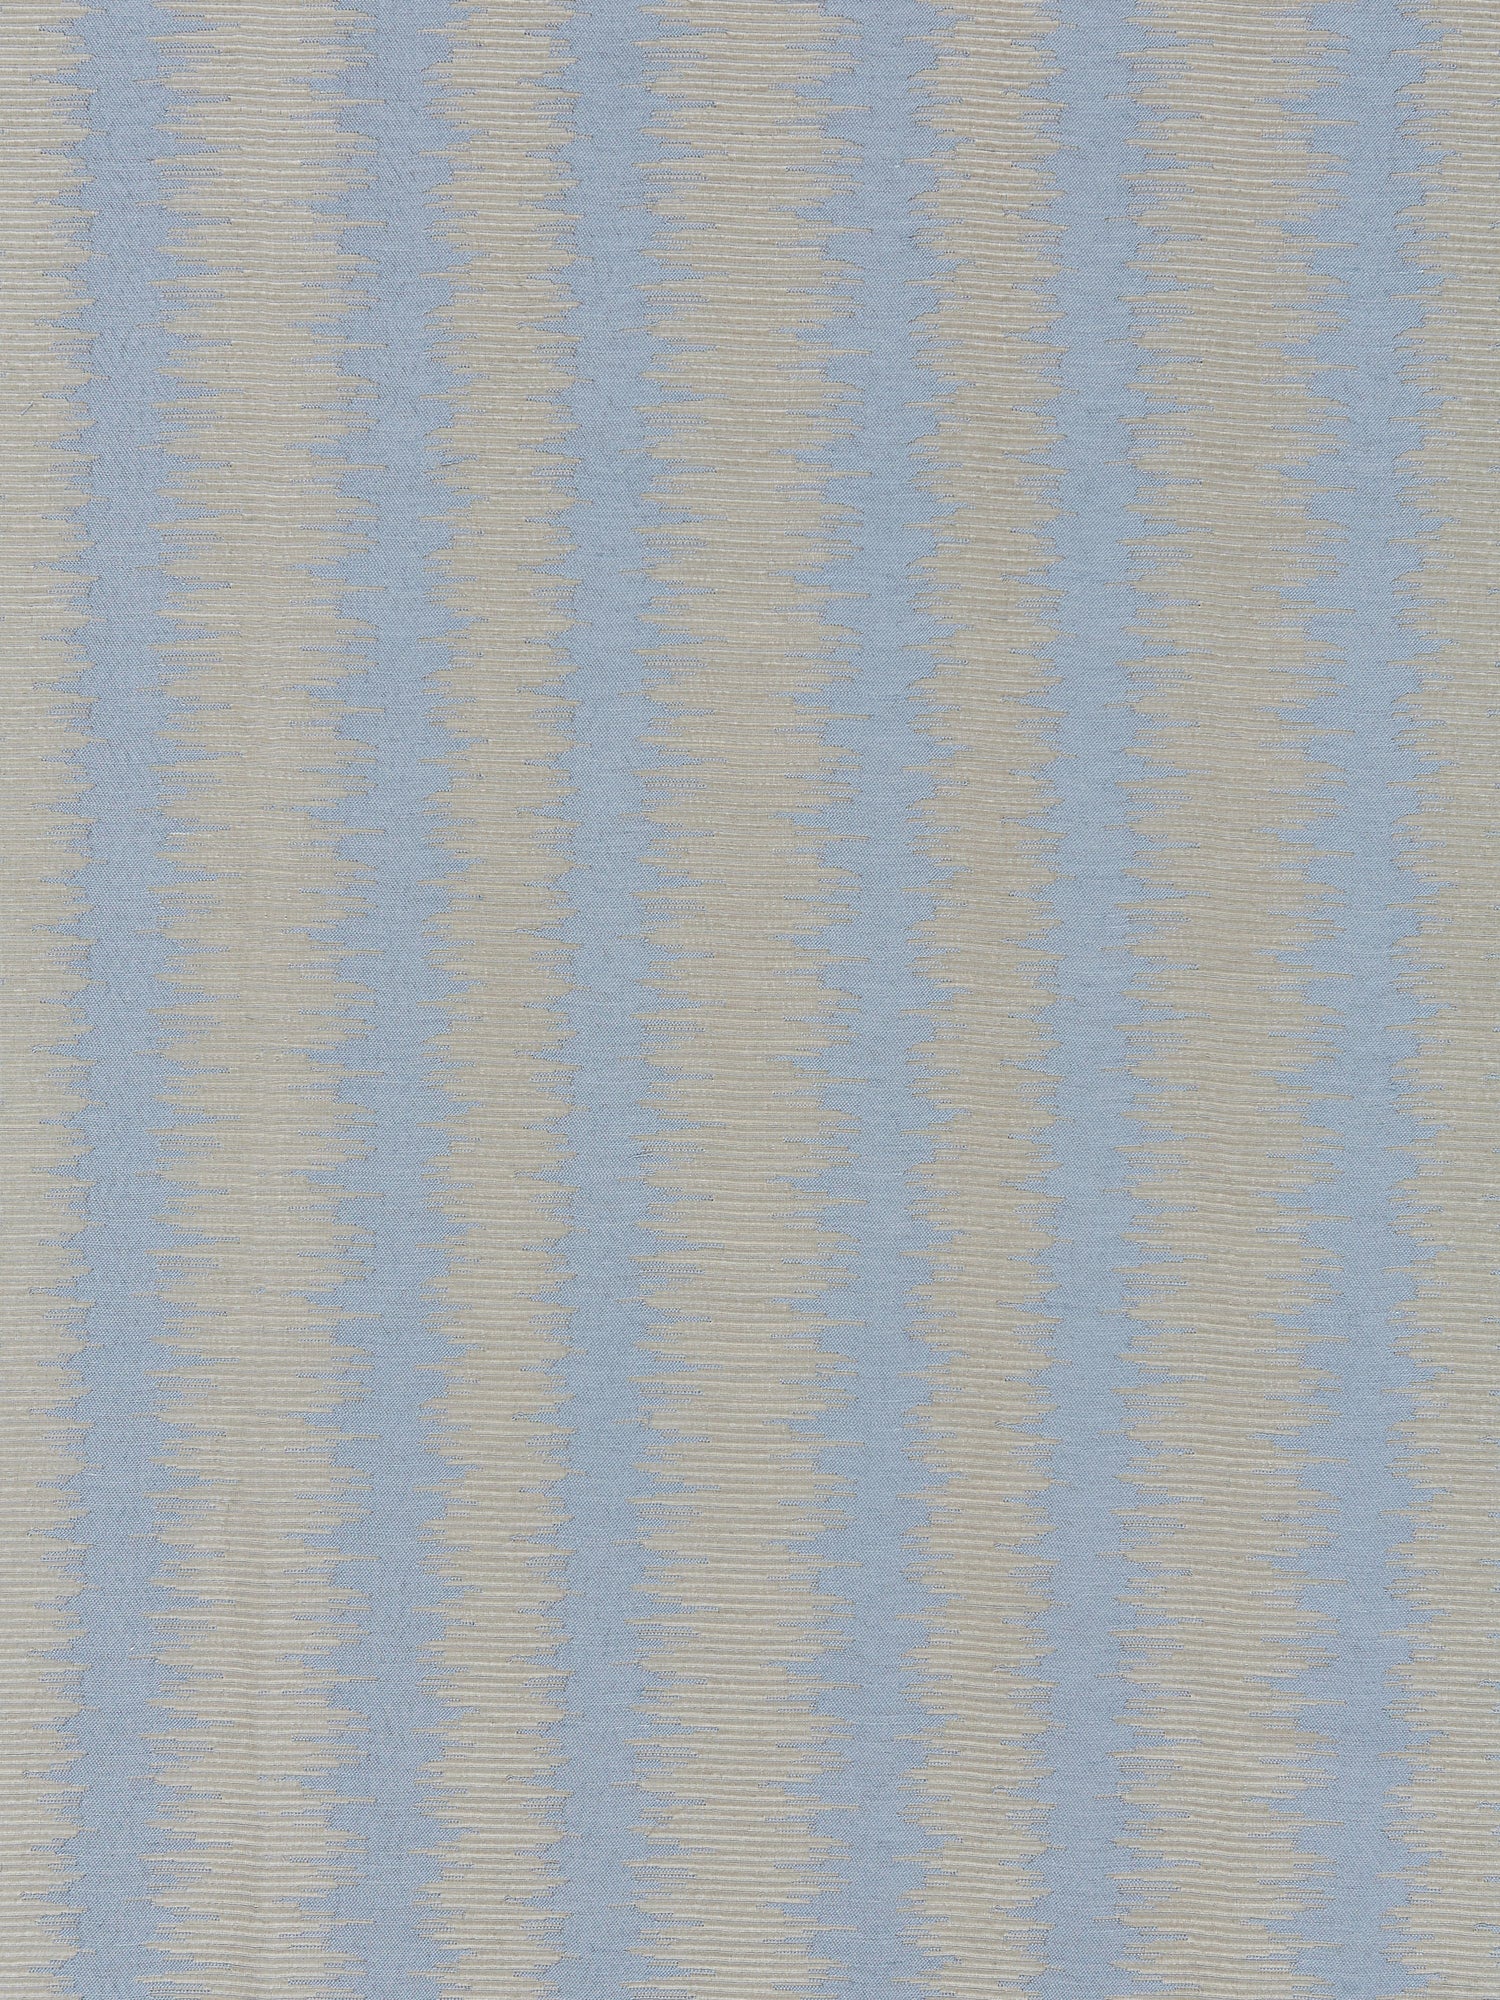 Konya Ikat Stripe fabric in bluestone color - pattern number SC 000327138 - by Scalamandre in the Scalamandre Fabrics Book 1 collection